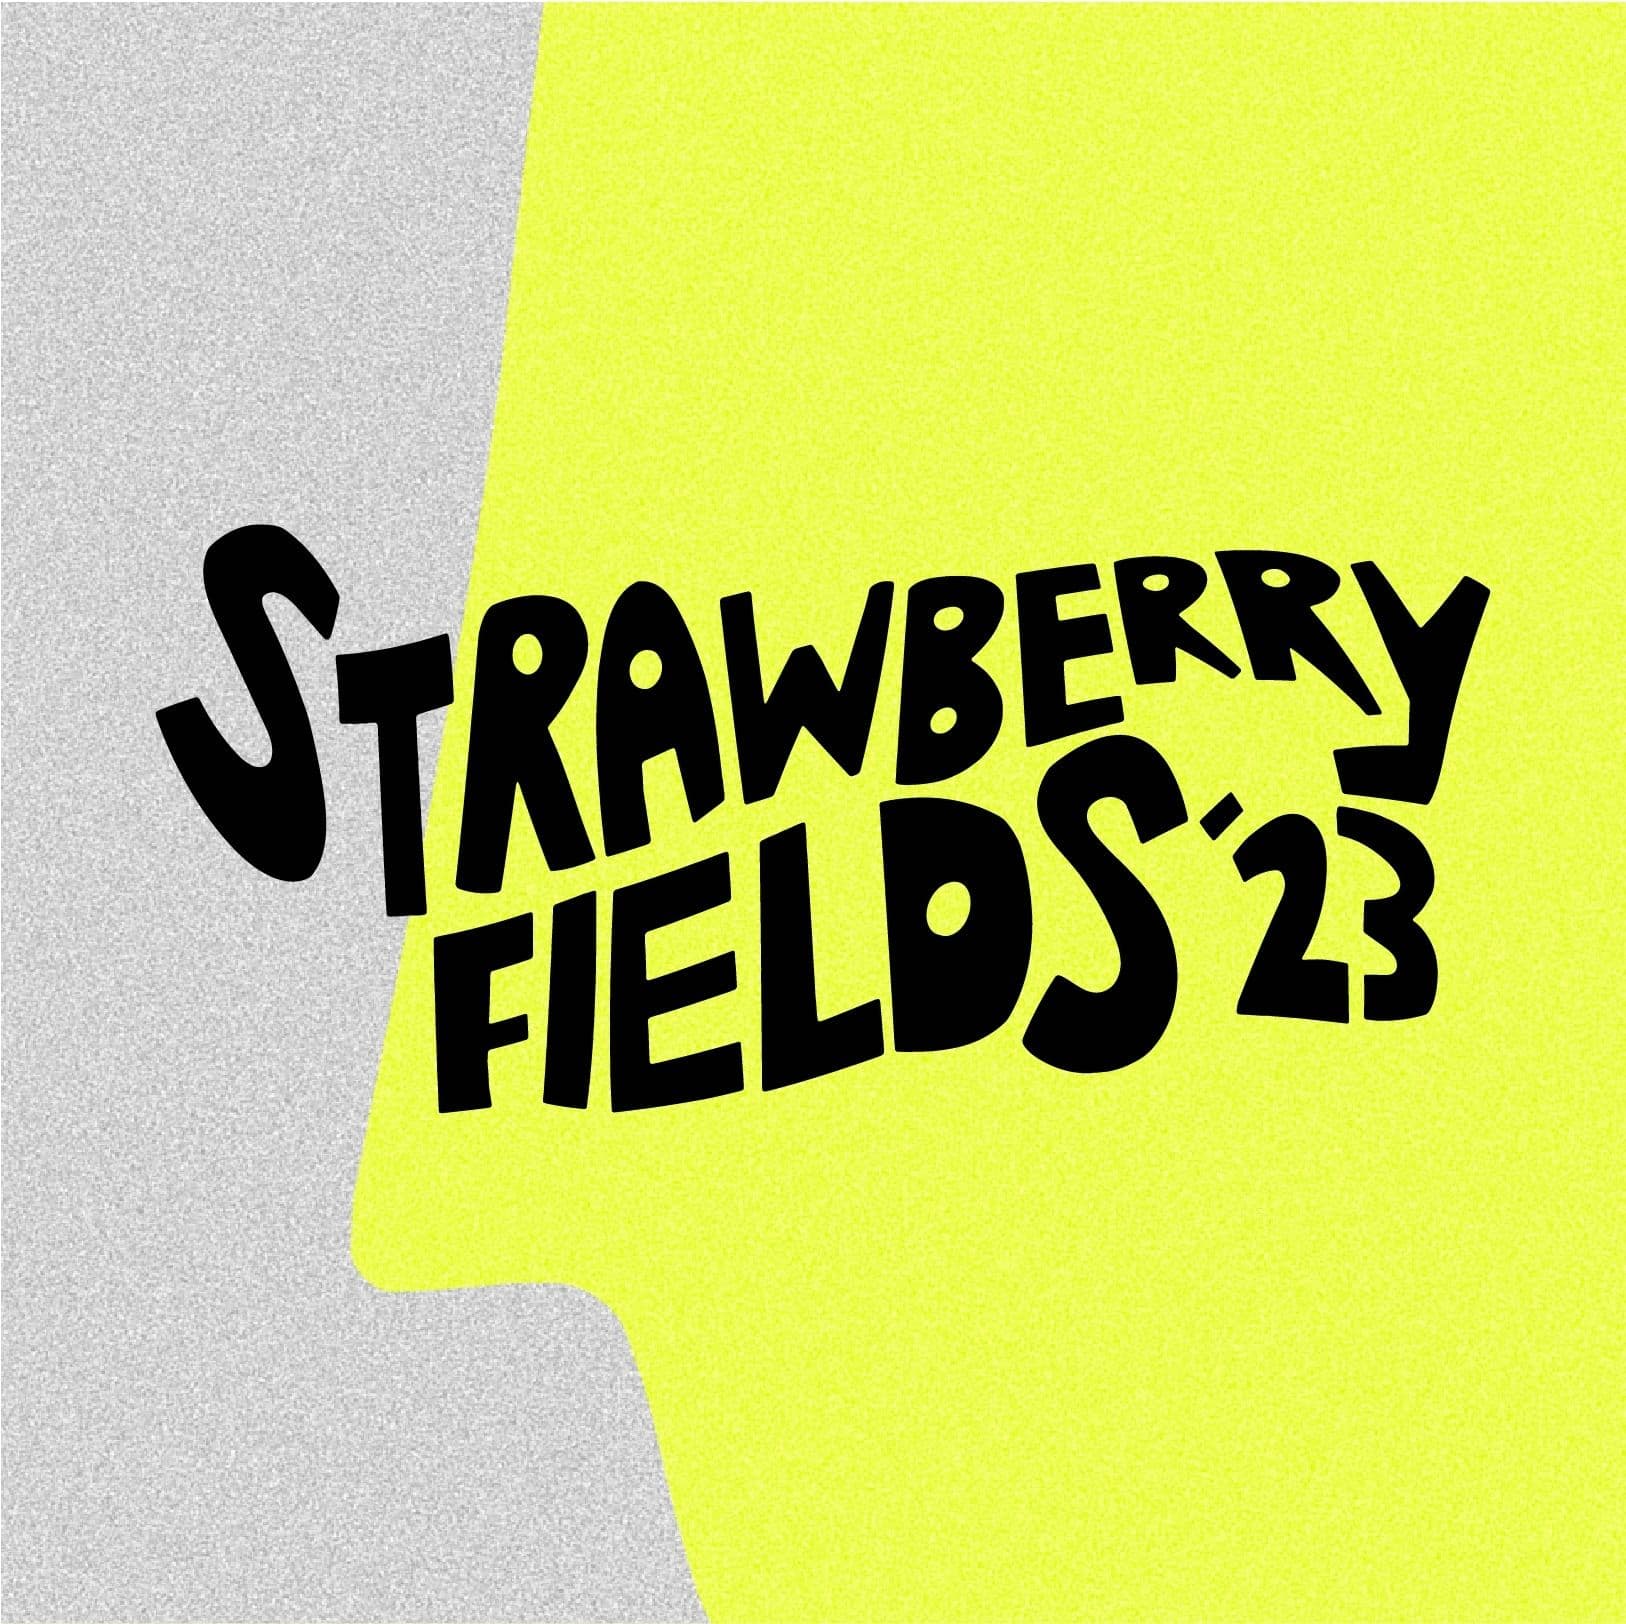 Strawberry Fields 2023 Set Times and Festival Map Released